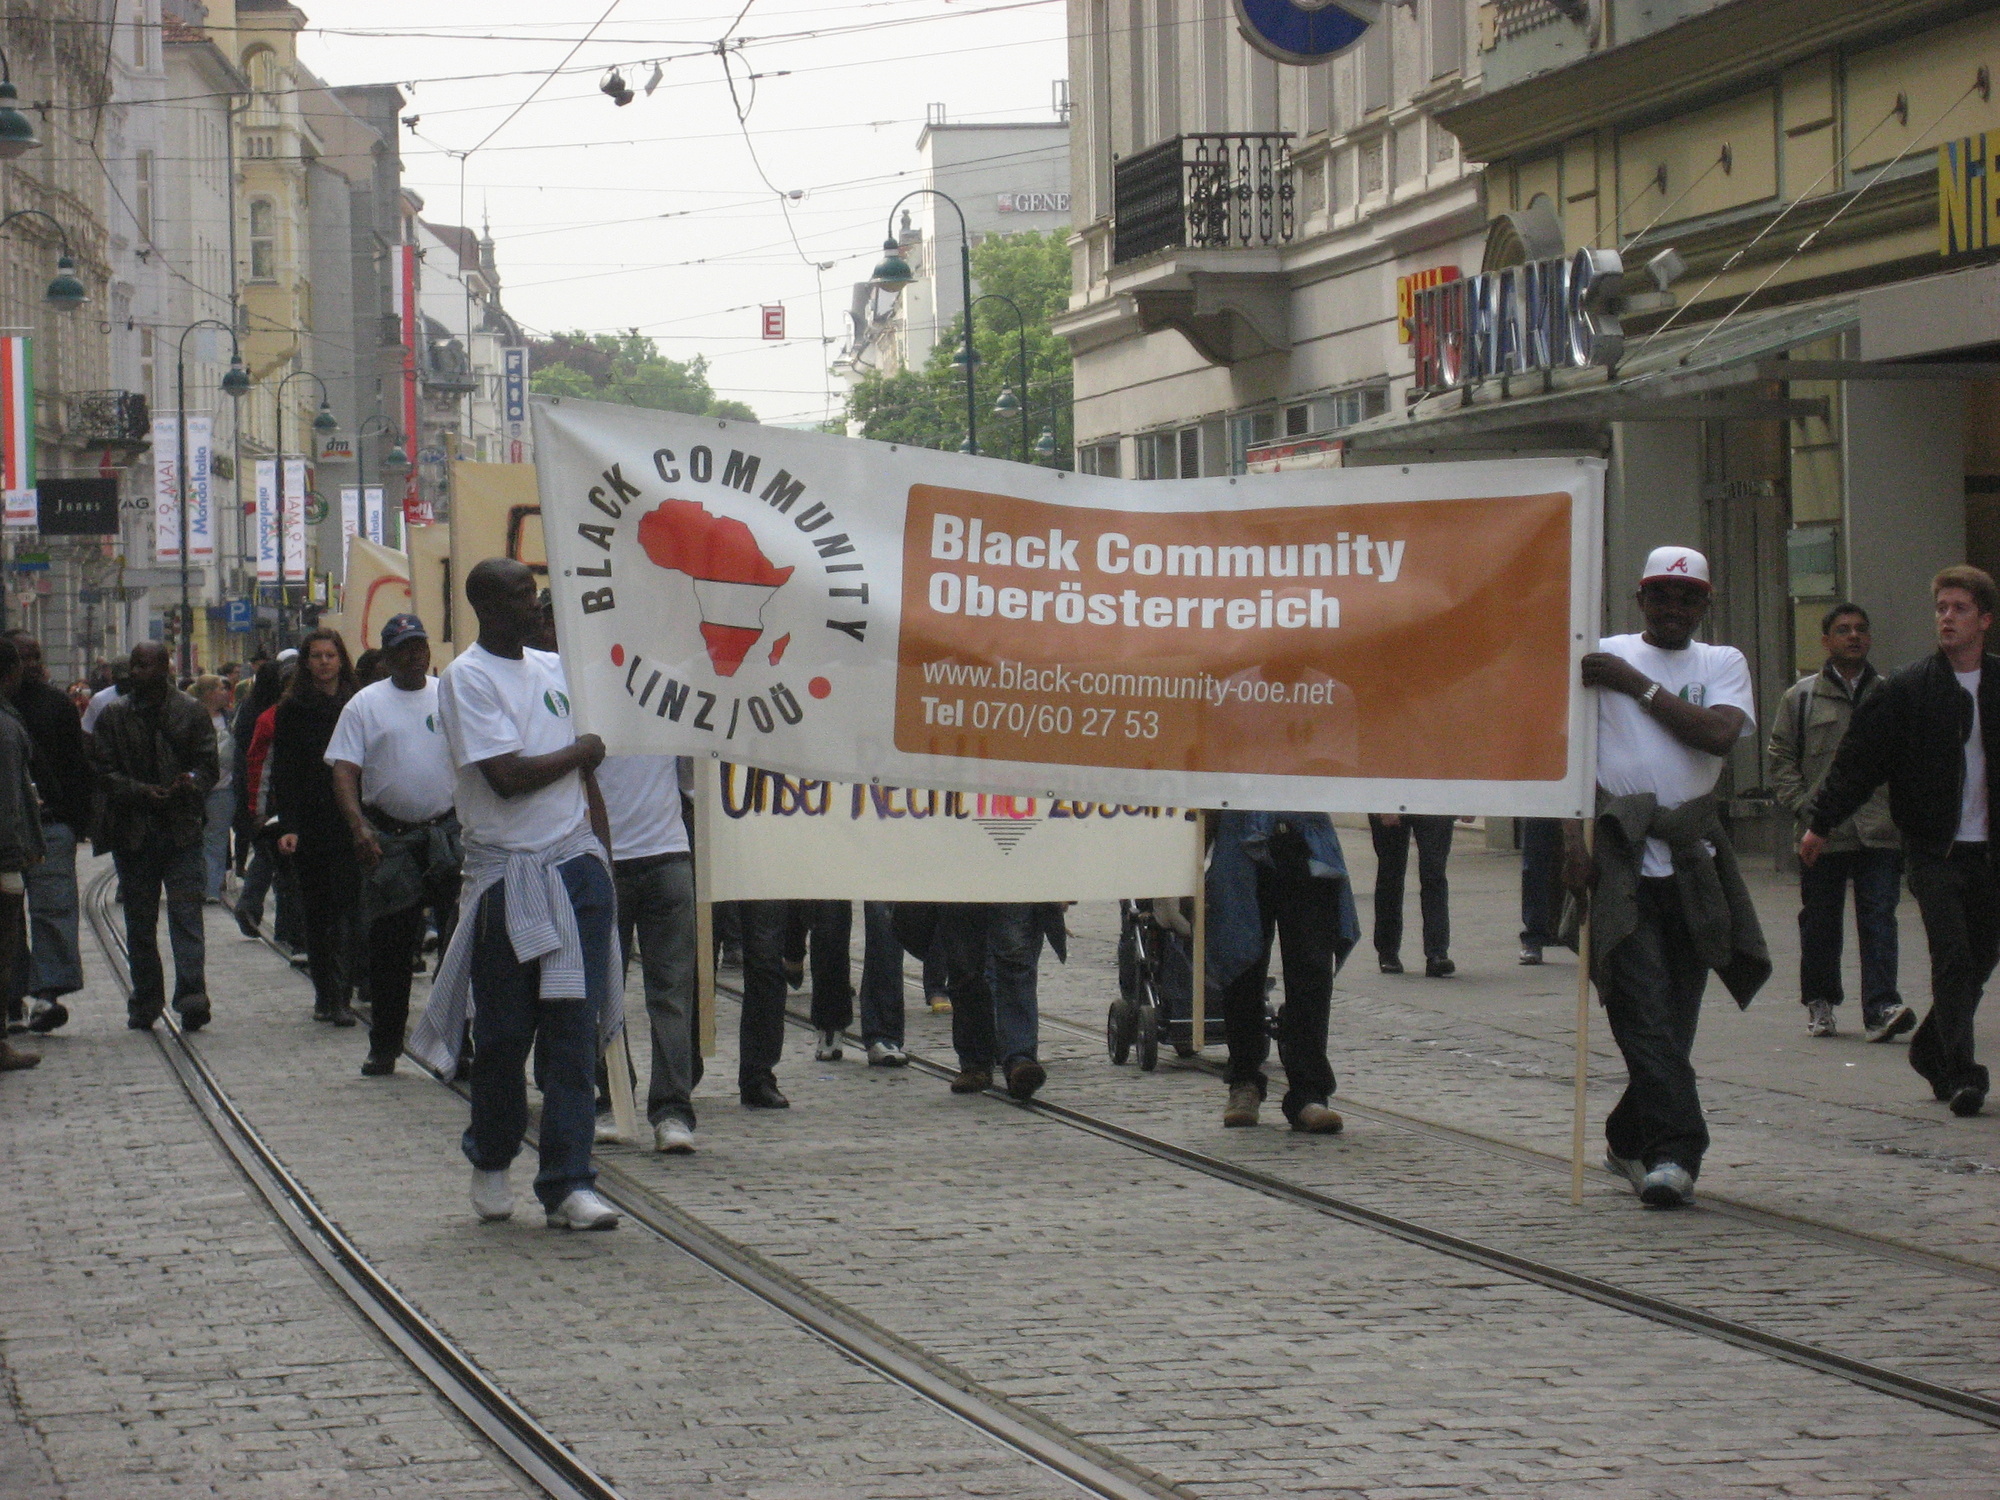 The Black Community in Linz